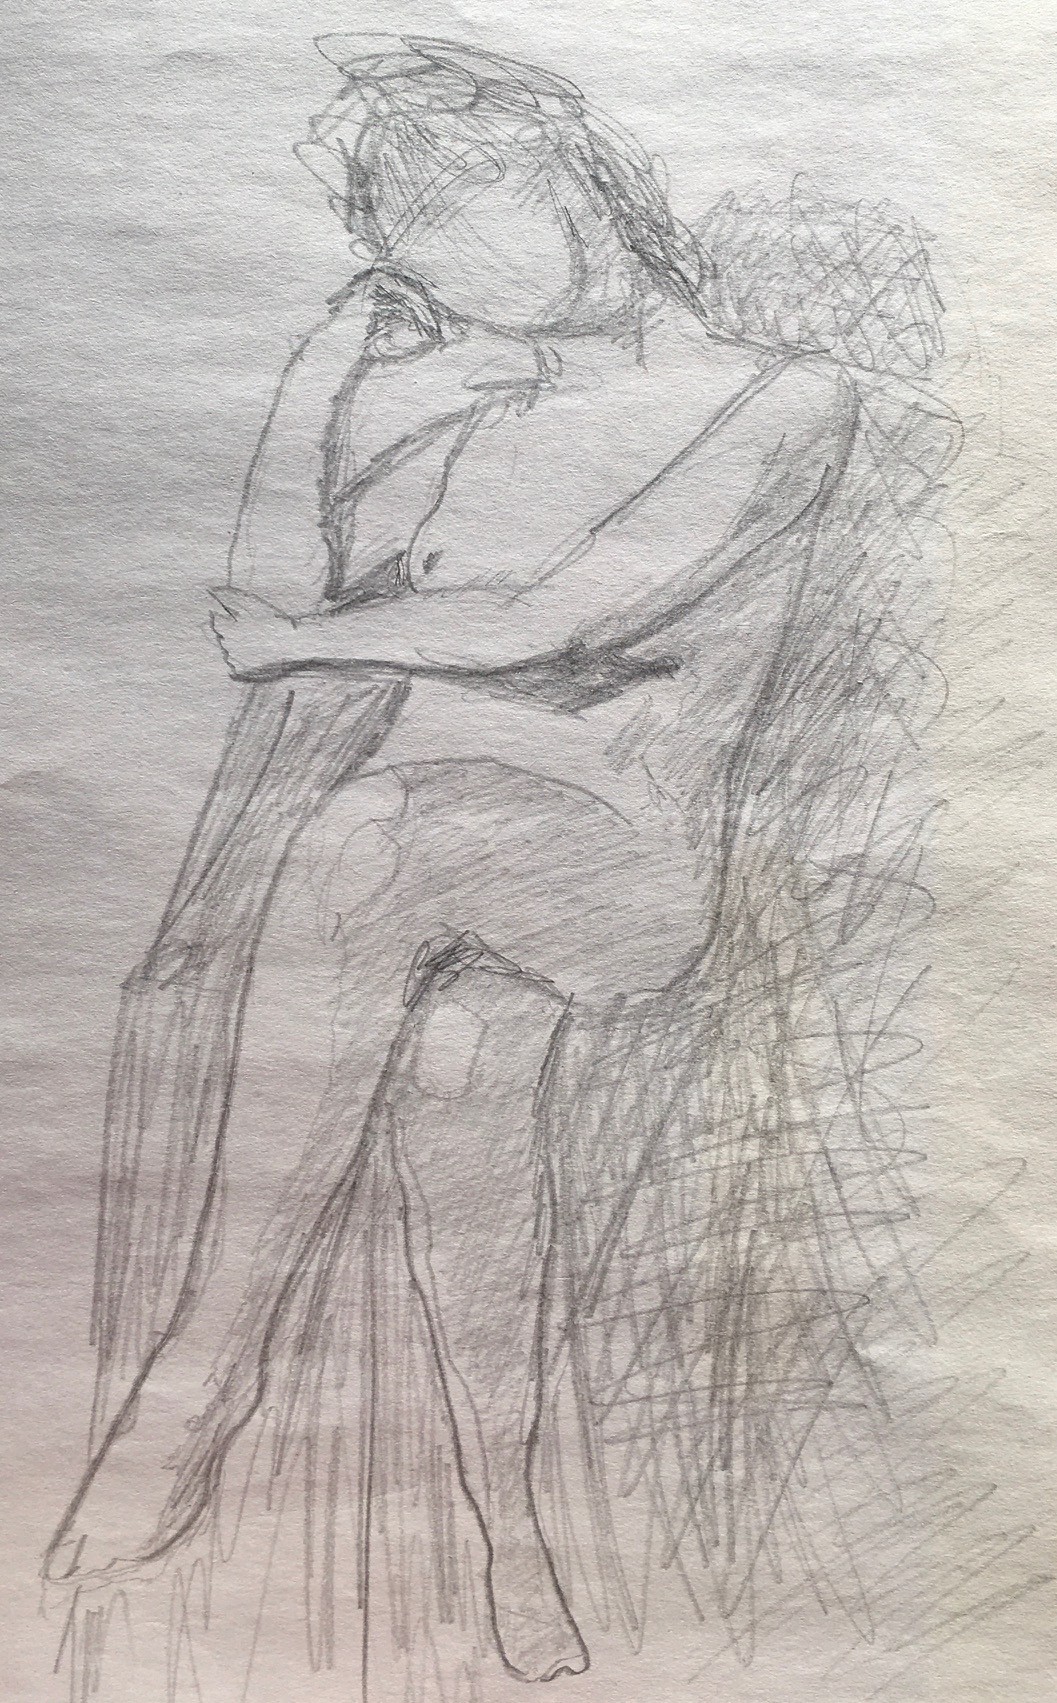 Gesture Drawing #2, 2019
Pencil on Paper
10"W x 16"H, Walli White, artist